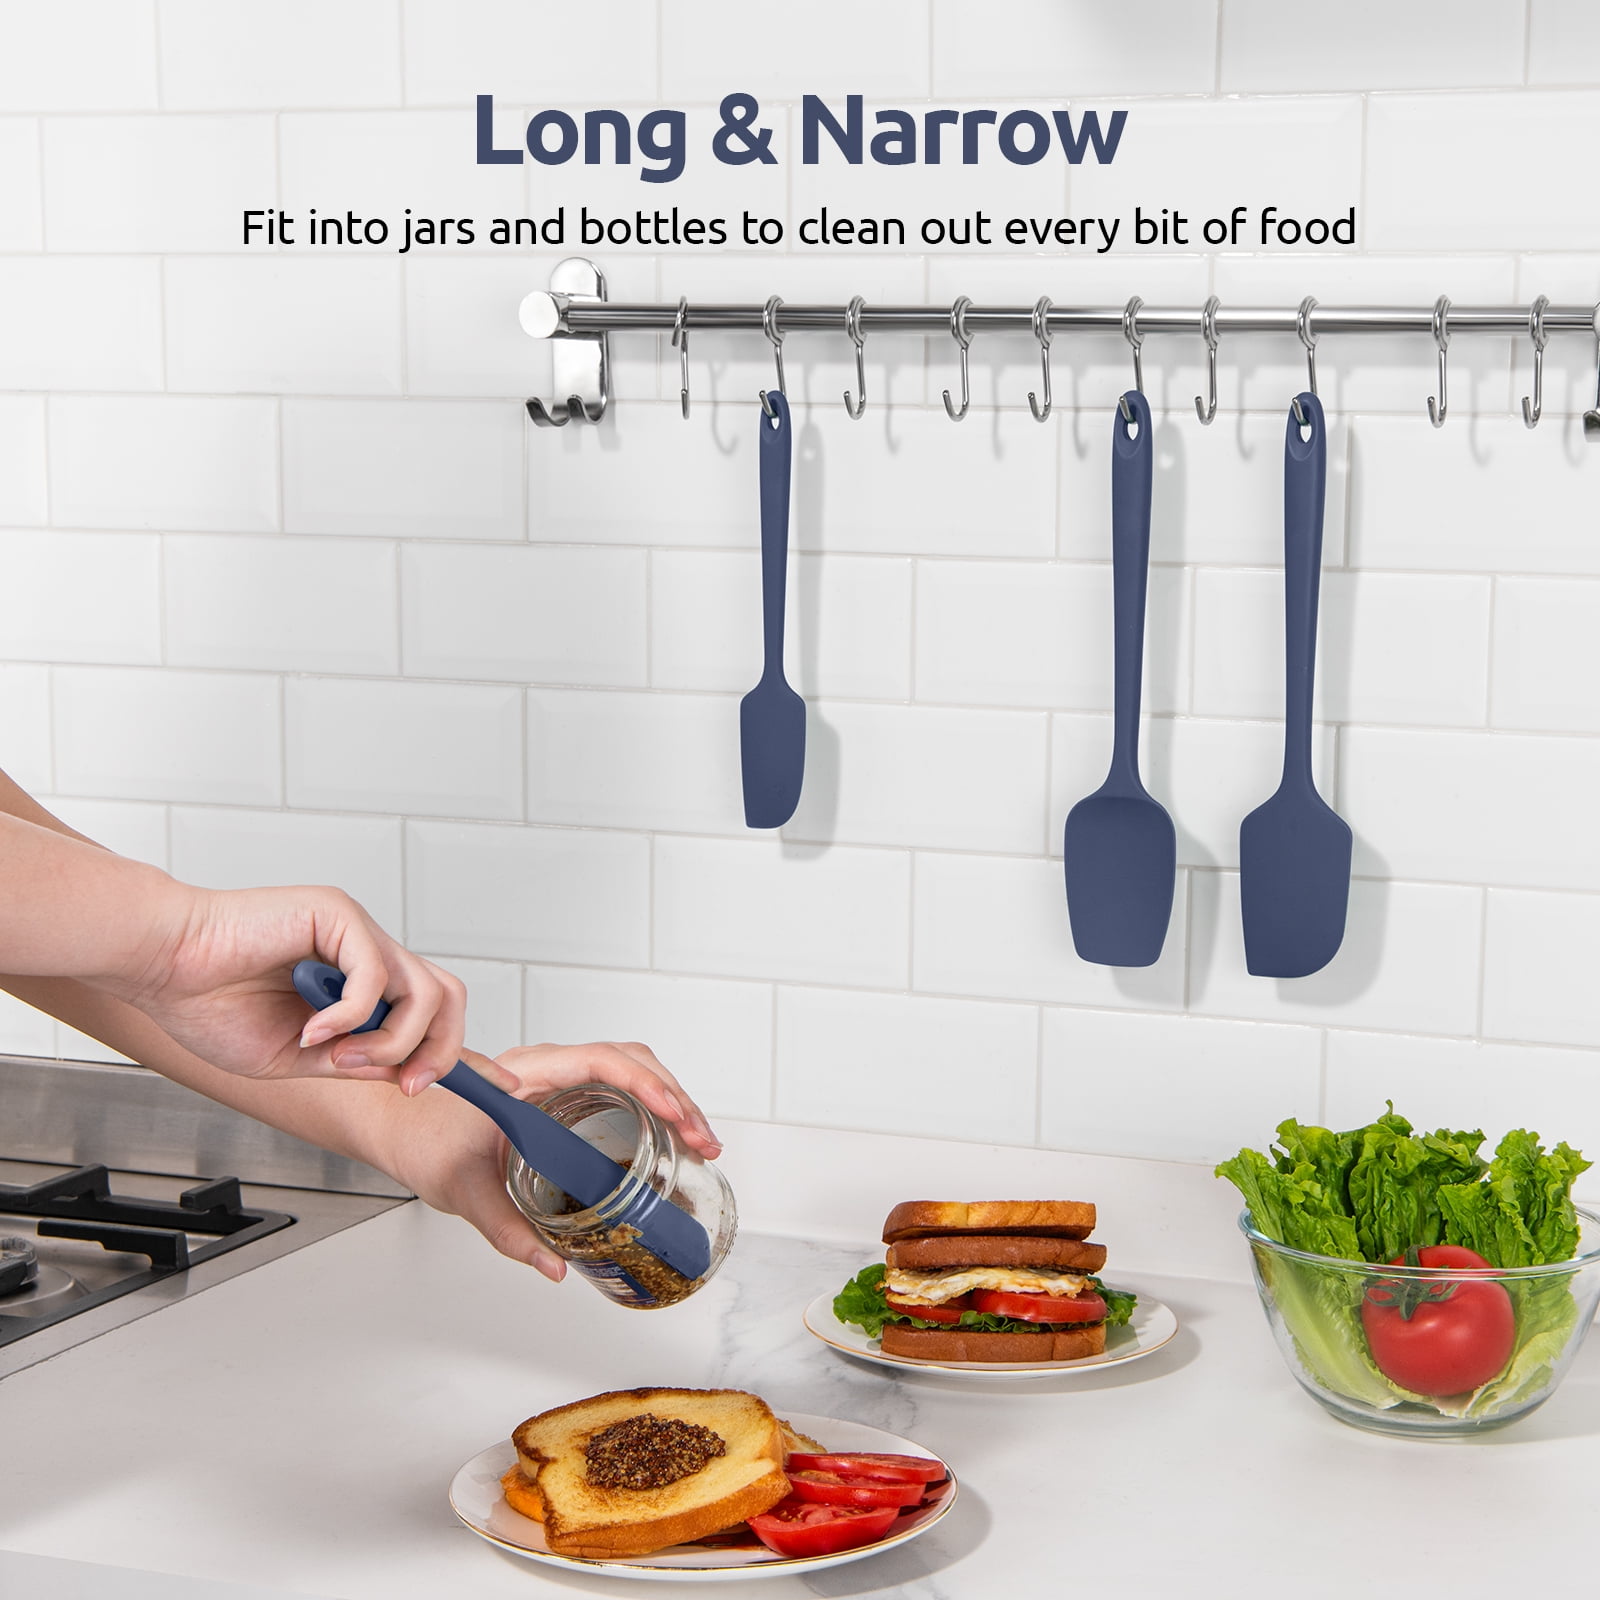 UpGood Silicone Spatula Set 600°F - High Heat Resistant Nonstick, Small and  Large Kitchen Spatulas -…See more UpGood Silicone Spatula Set 600°F - High